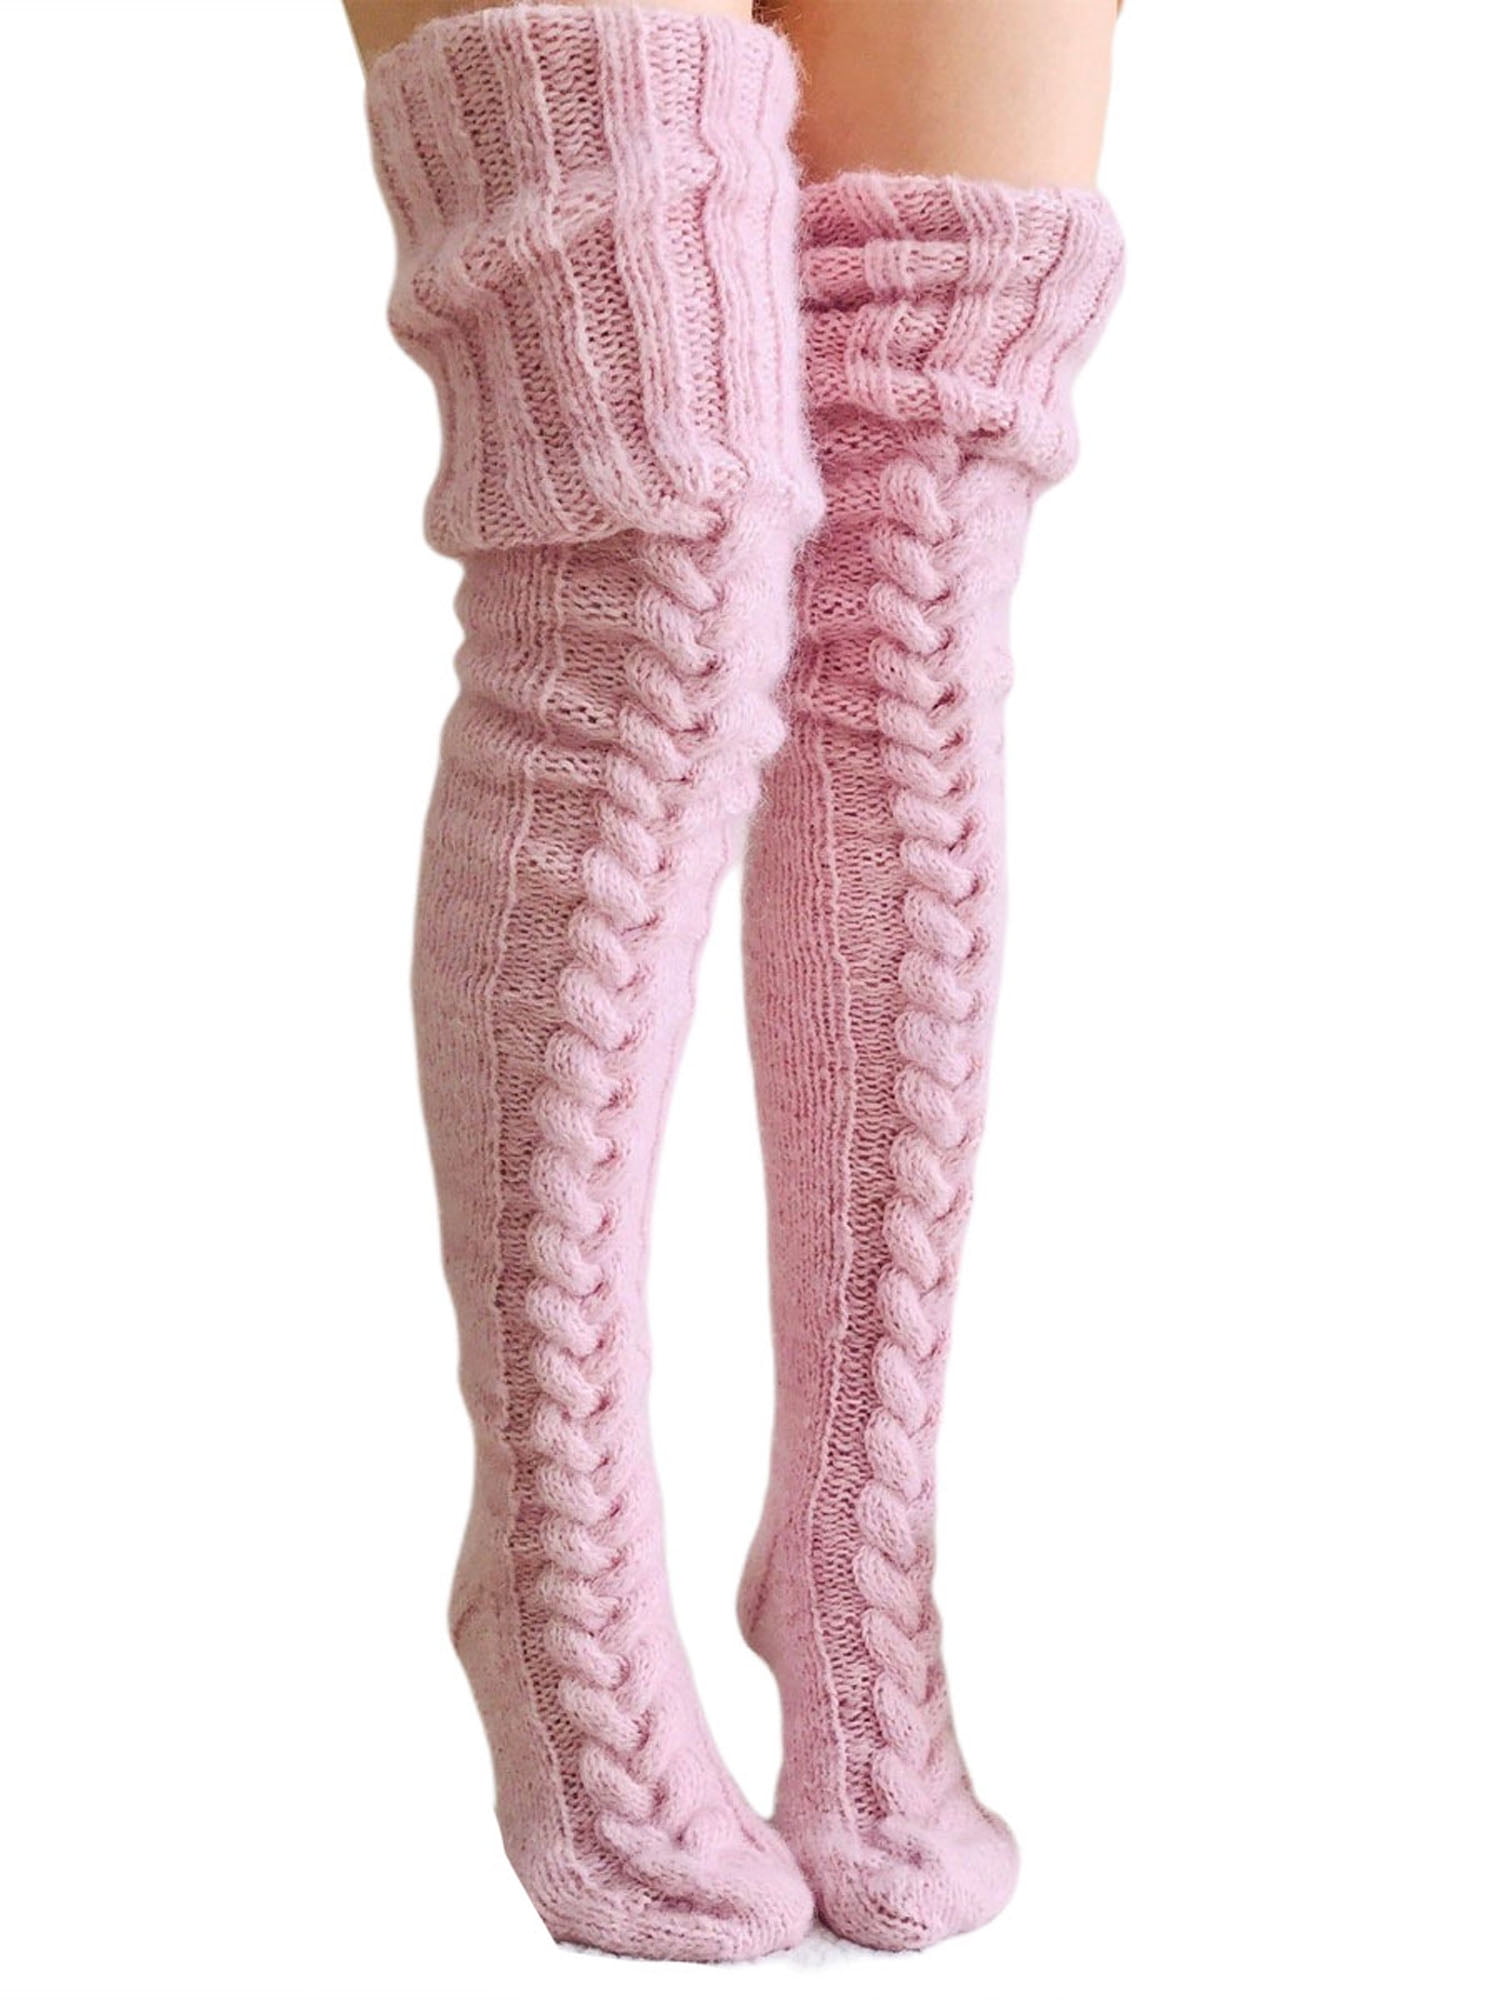 US Winter Women Warm Knitted Socks Over Knee Long Thigh High Boot Wool Stockings 